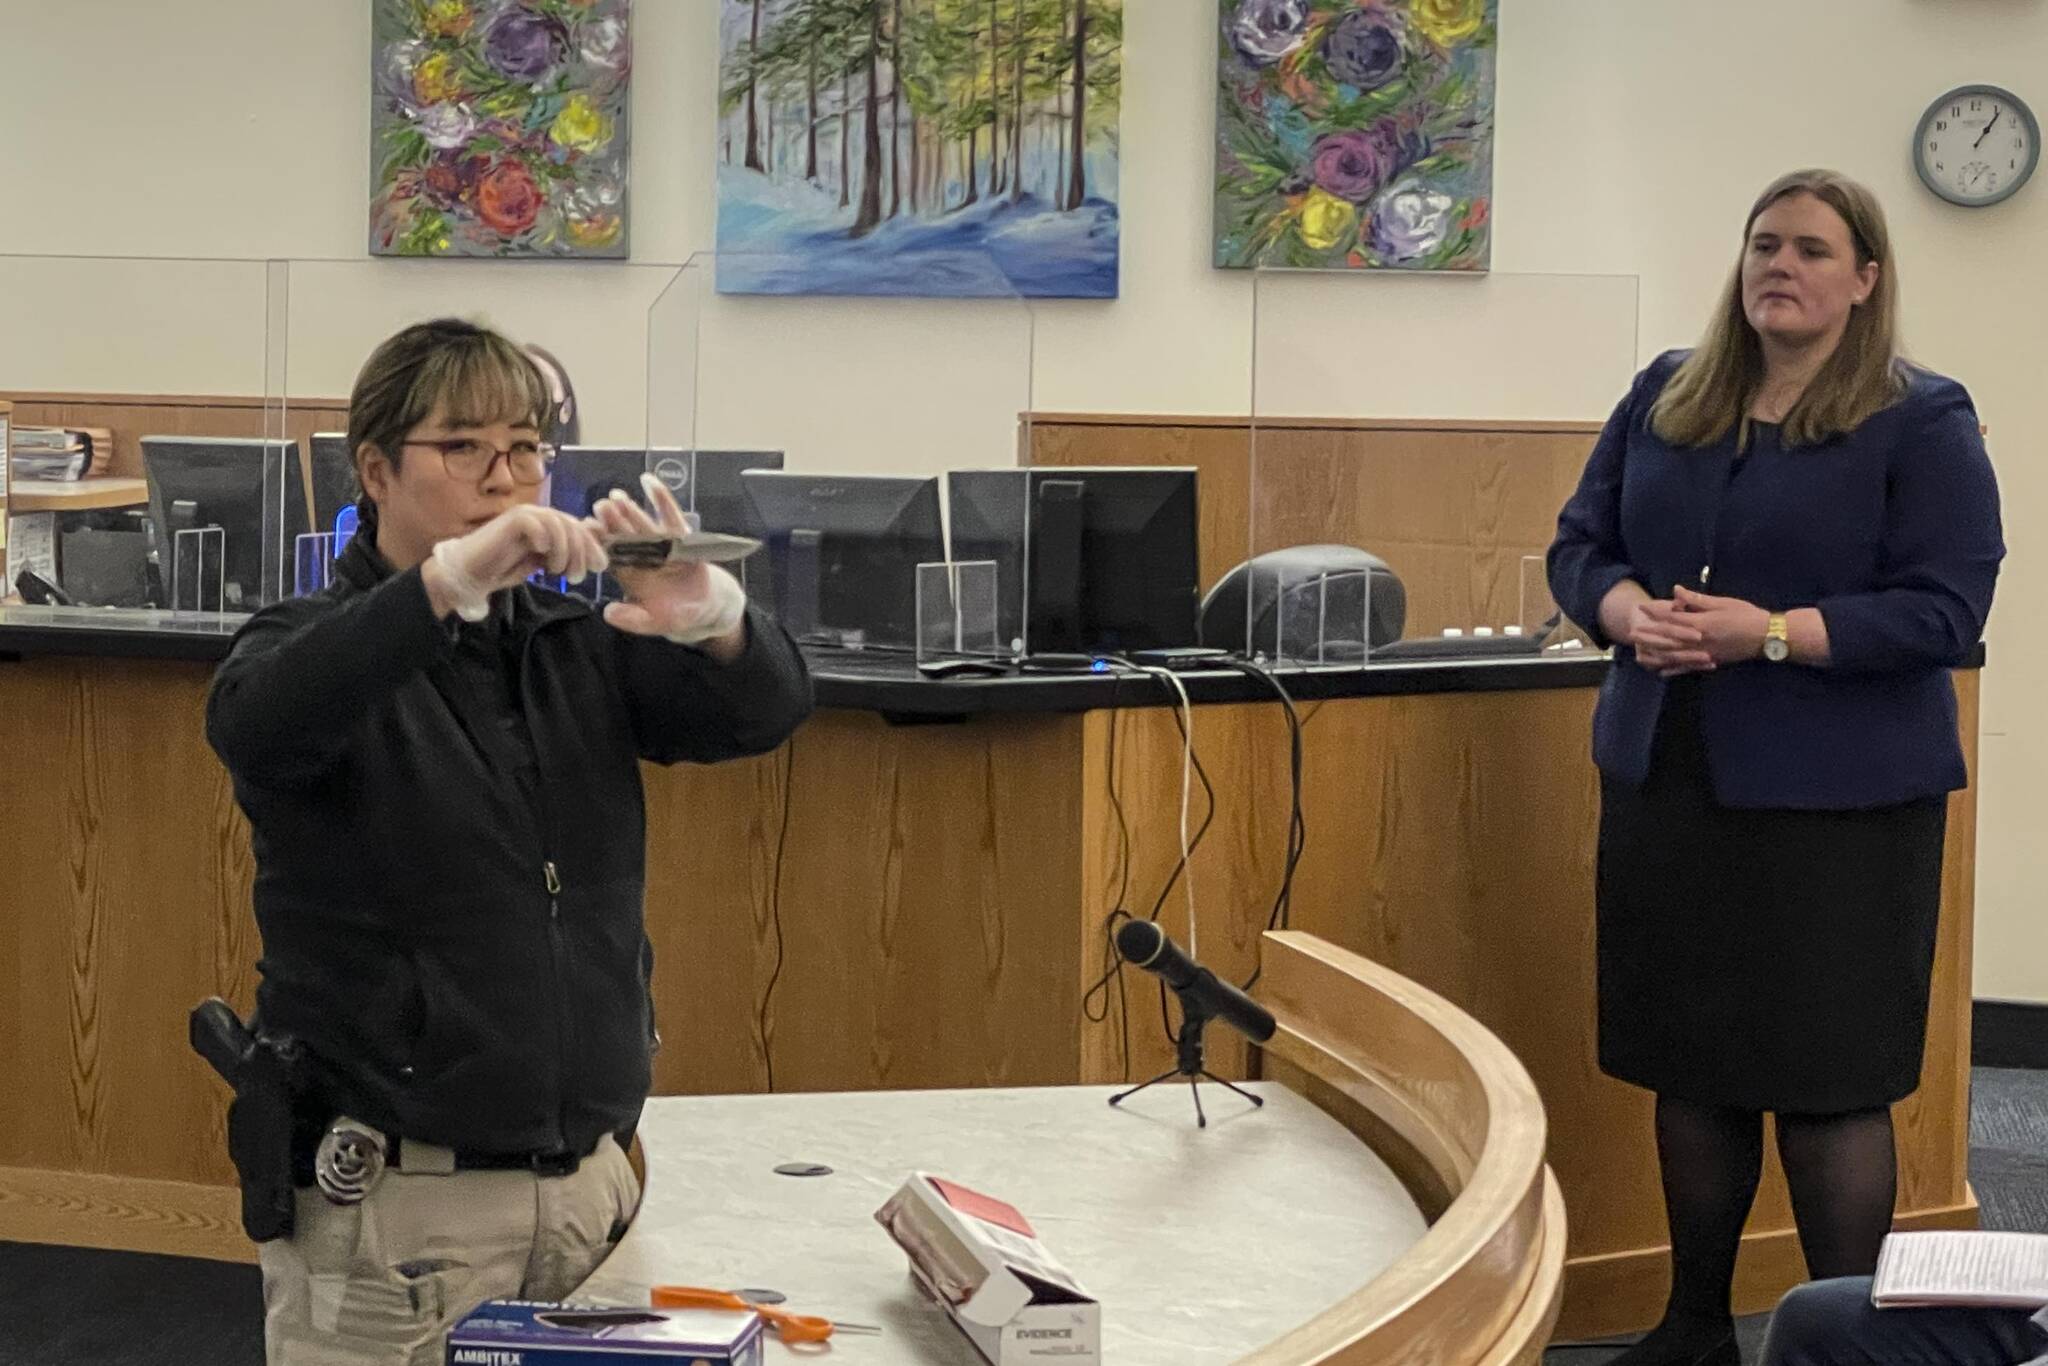 Detective Kathy Underwood of the Juneau Police Department shows the jury the weapon used to stab the victim in a 2019 attack to death during the trial on May 19, 2022. (Michael S. Lockett / Juneau Empire)